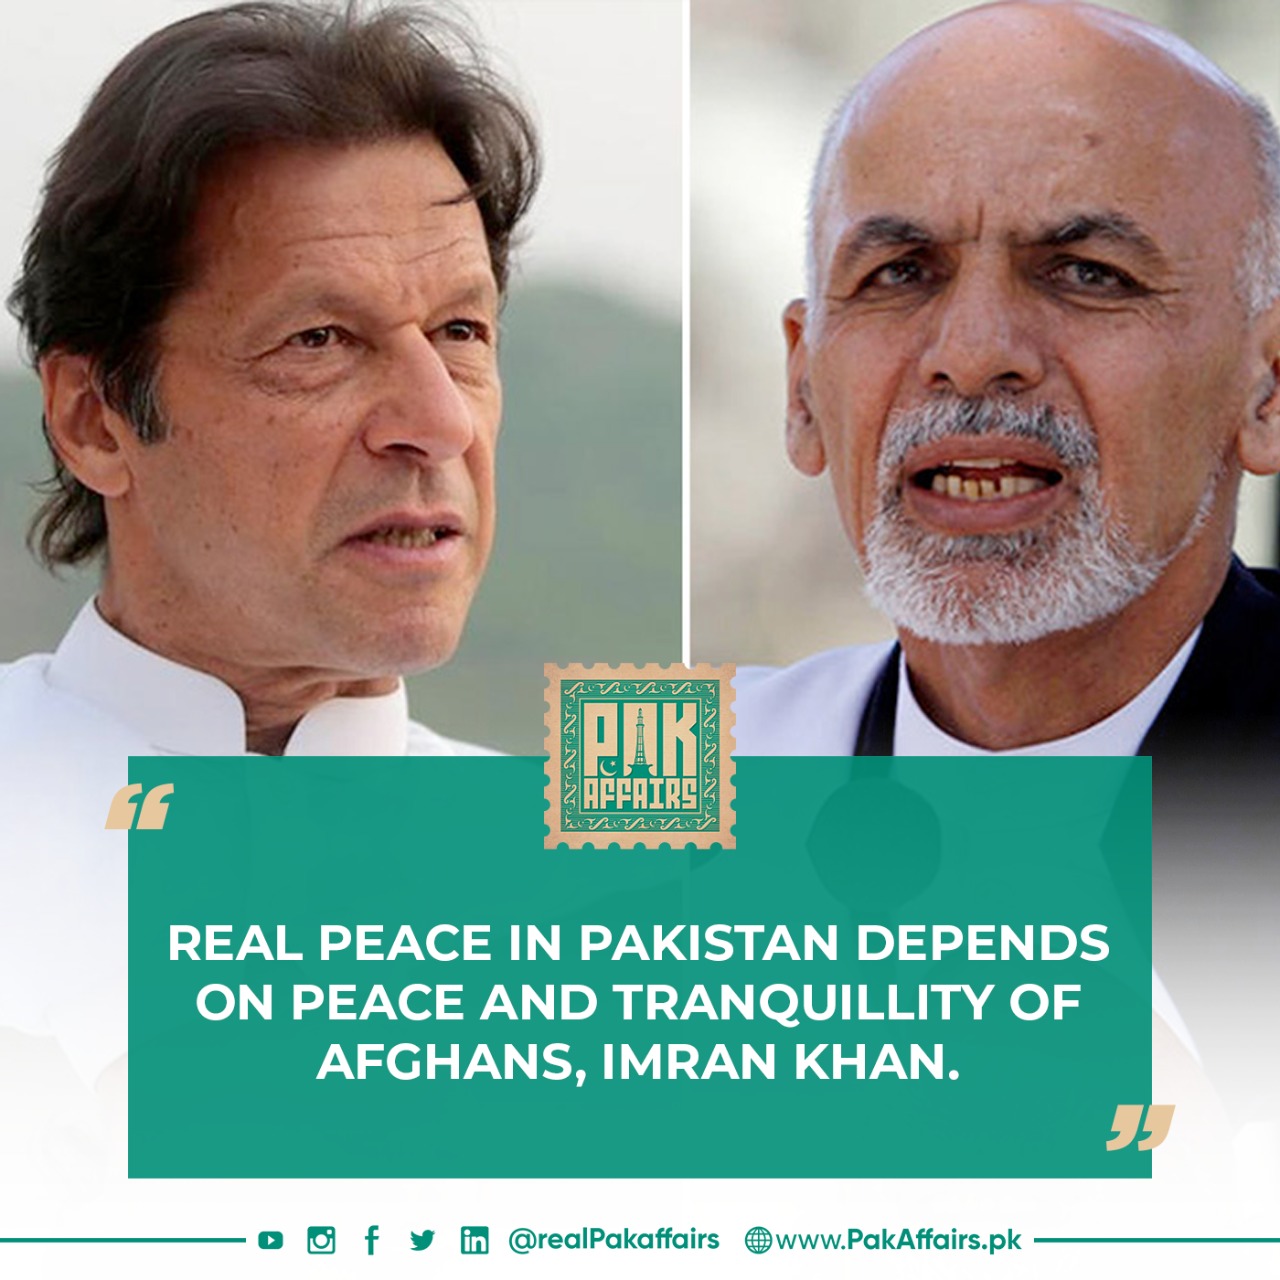 Real peace in Pakistan depends on peace and tranquillity of Afghans, Imran Khan